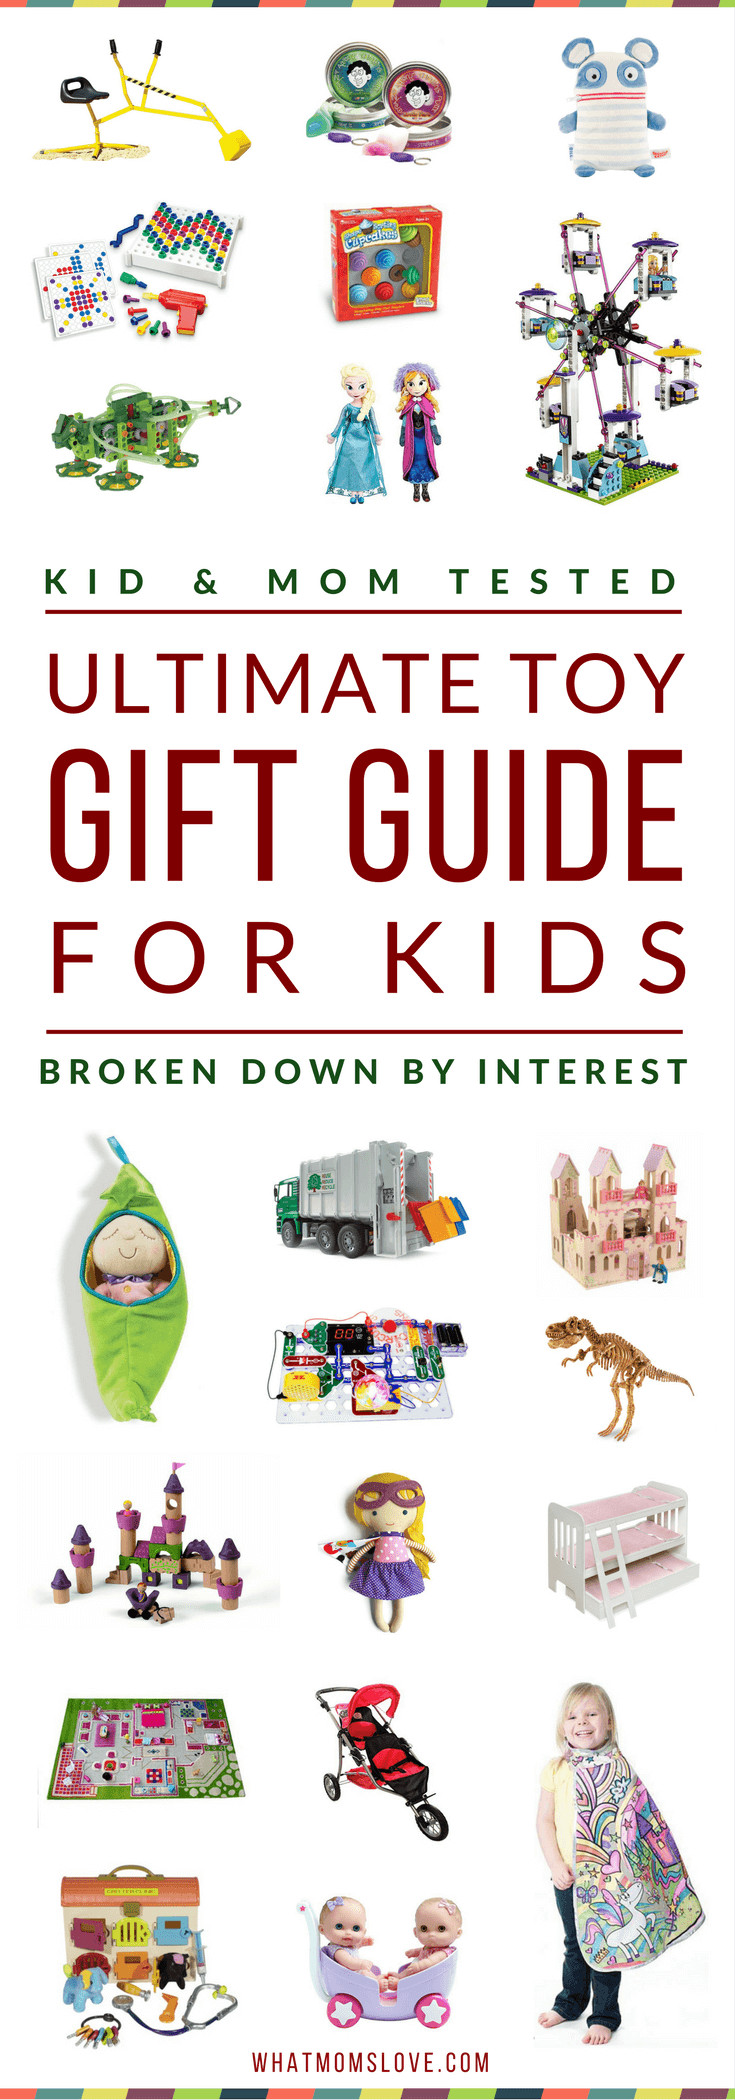 Gift Guides For Kids
 The Ultimate Toy Gift Guide For Kids ly The es They